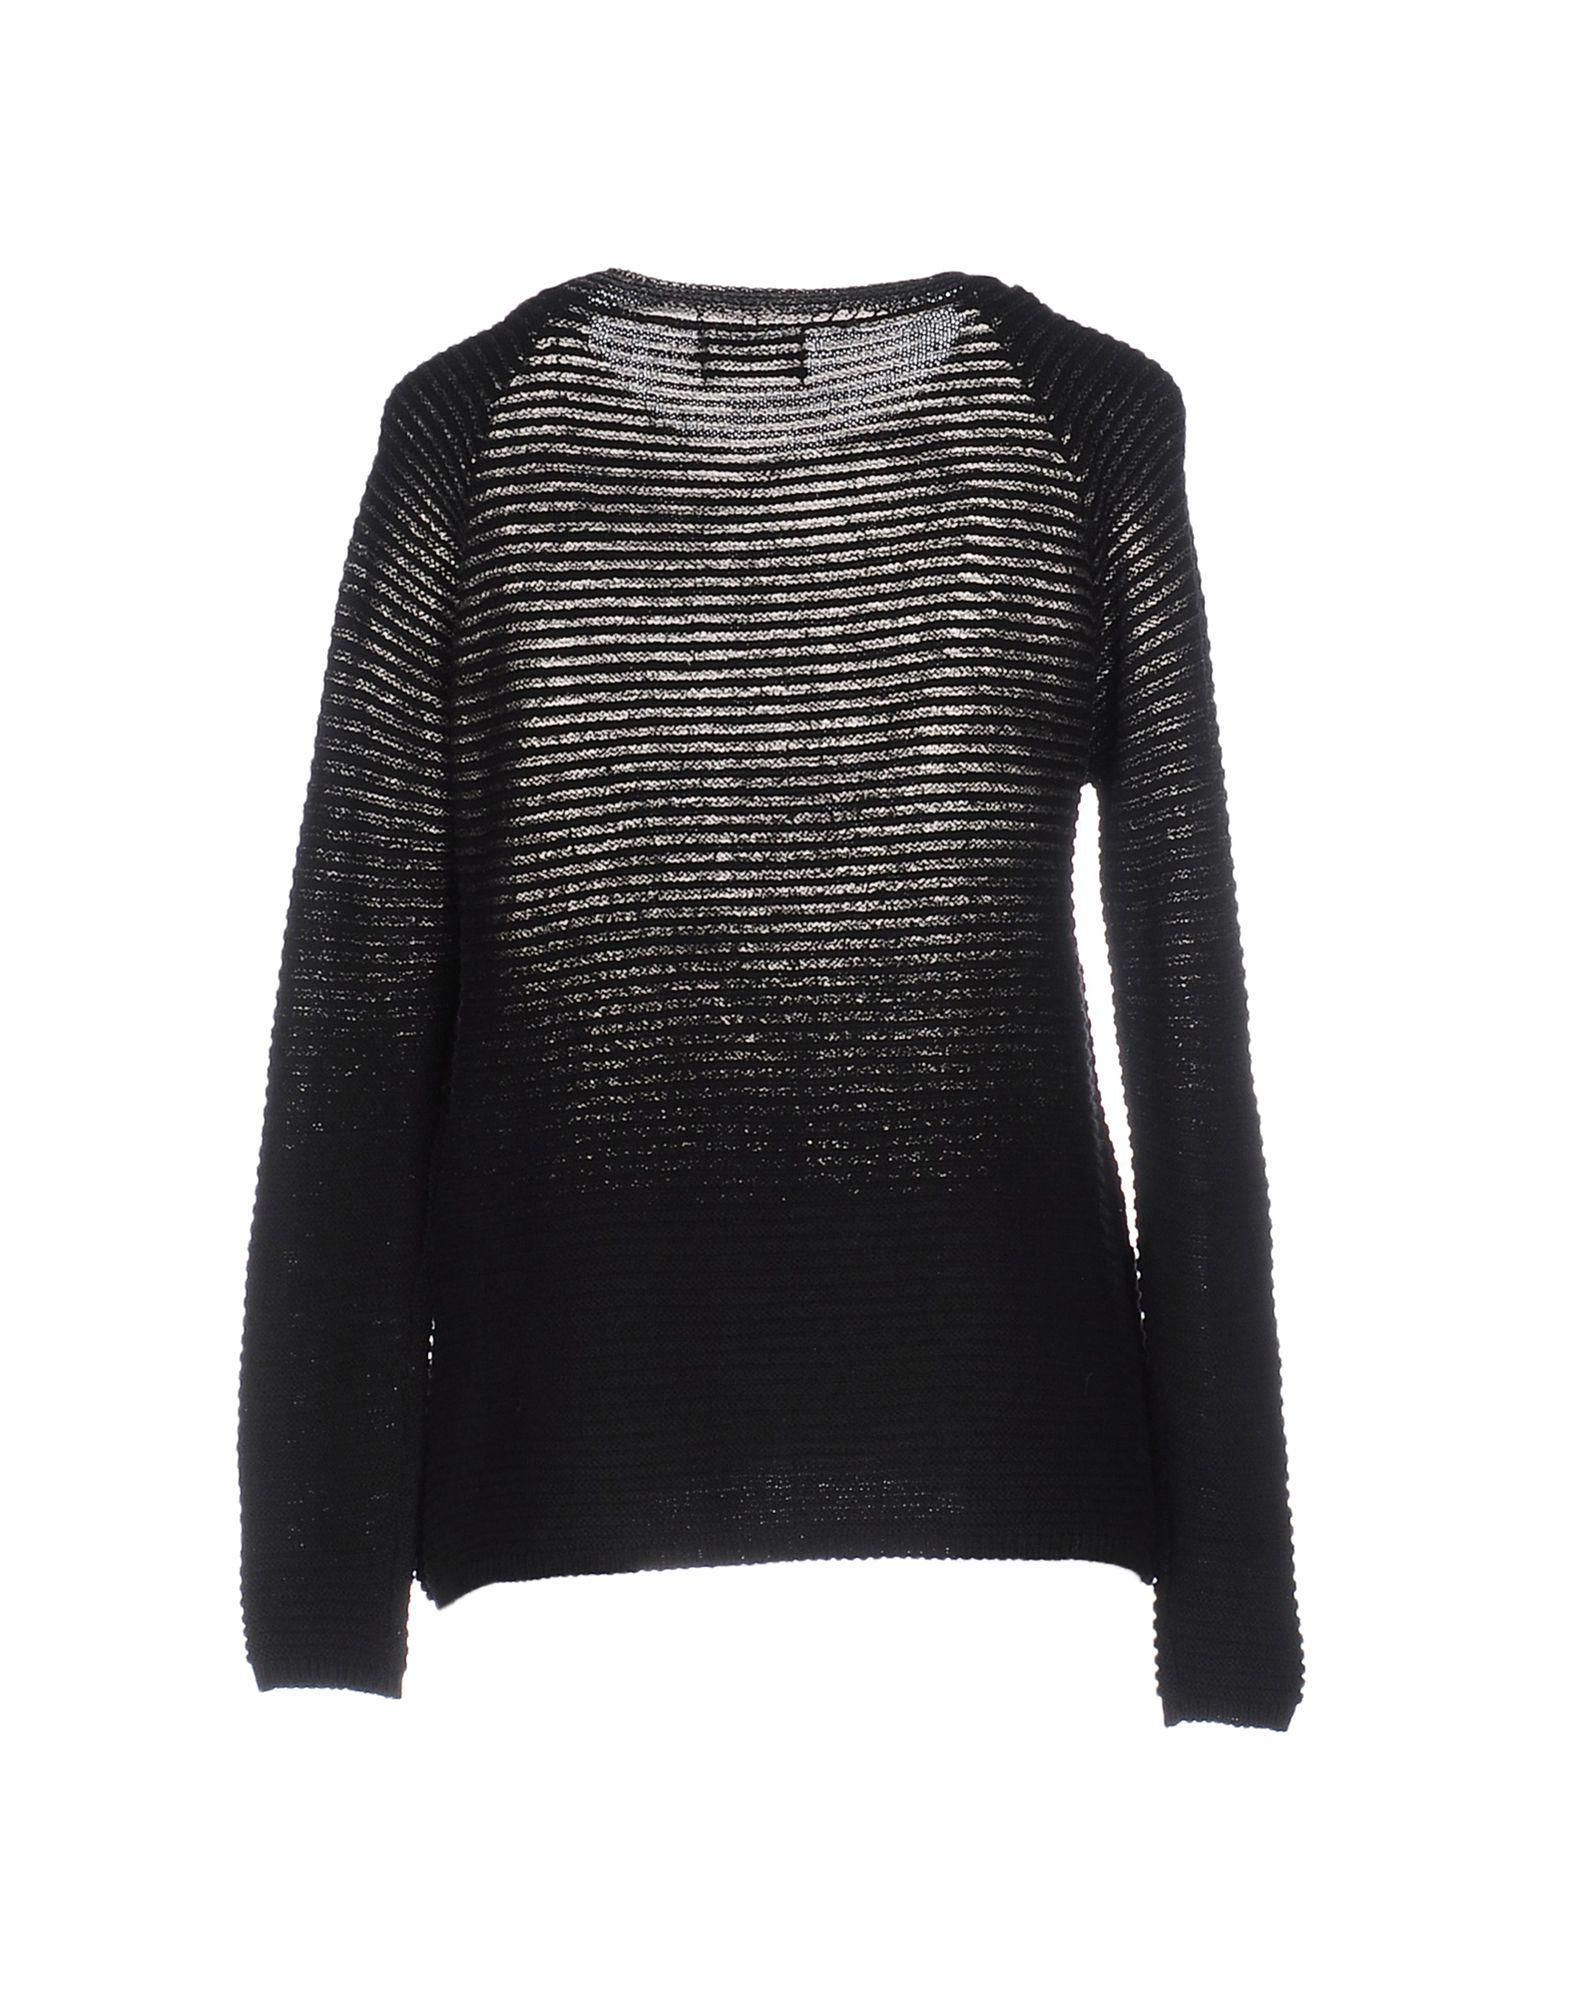 Lyst - Only Jumper in Black